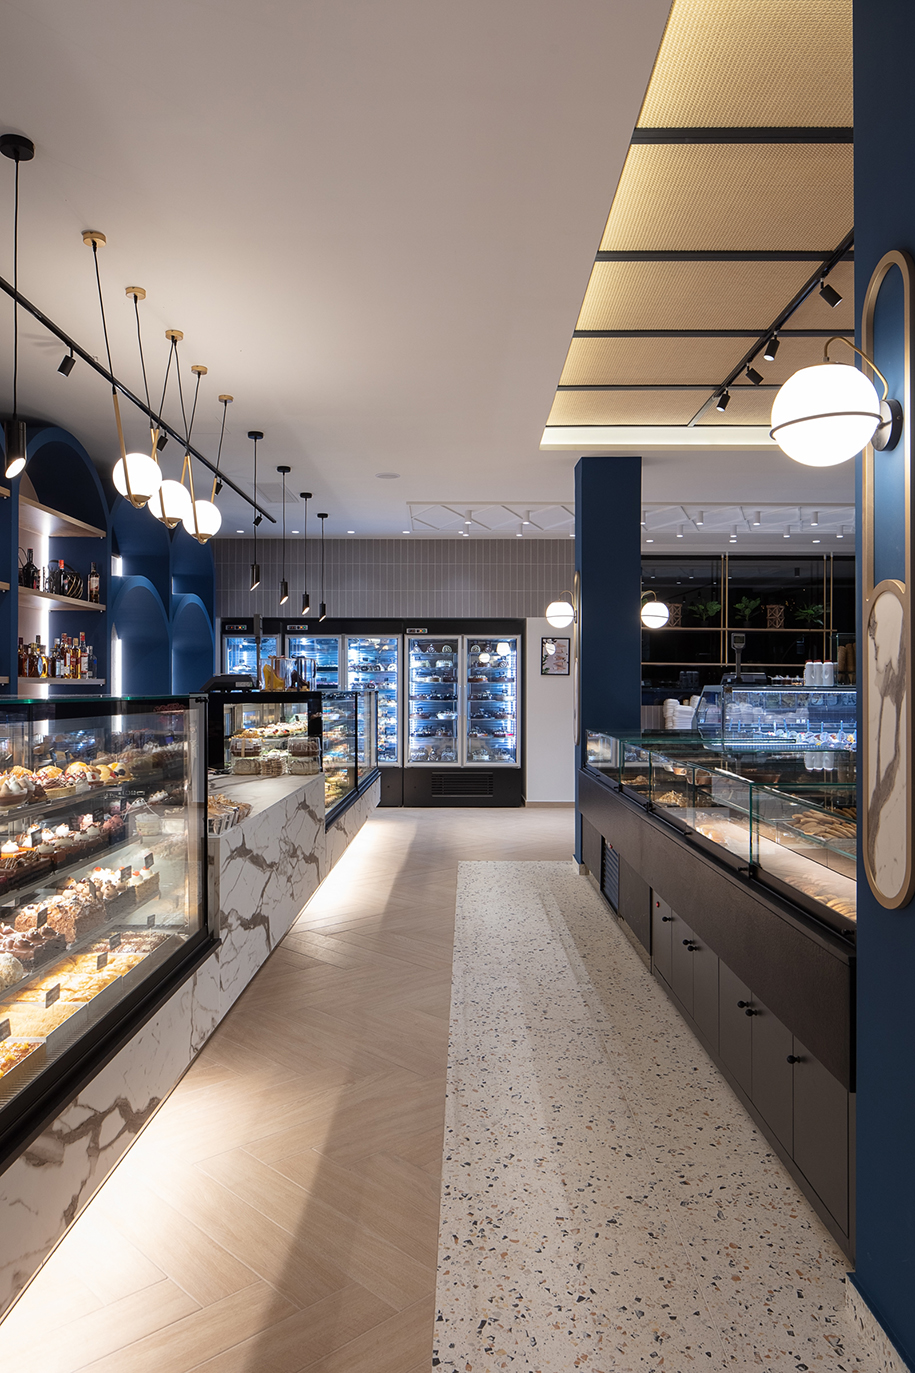 Archisearch A tastefull experience _ Bochotis pastry shop |G2 Lab